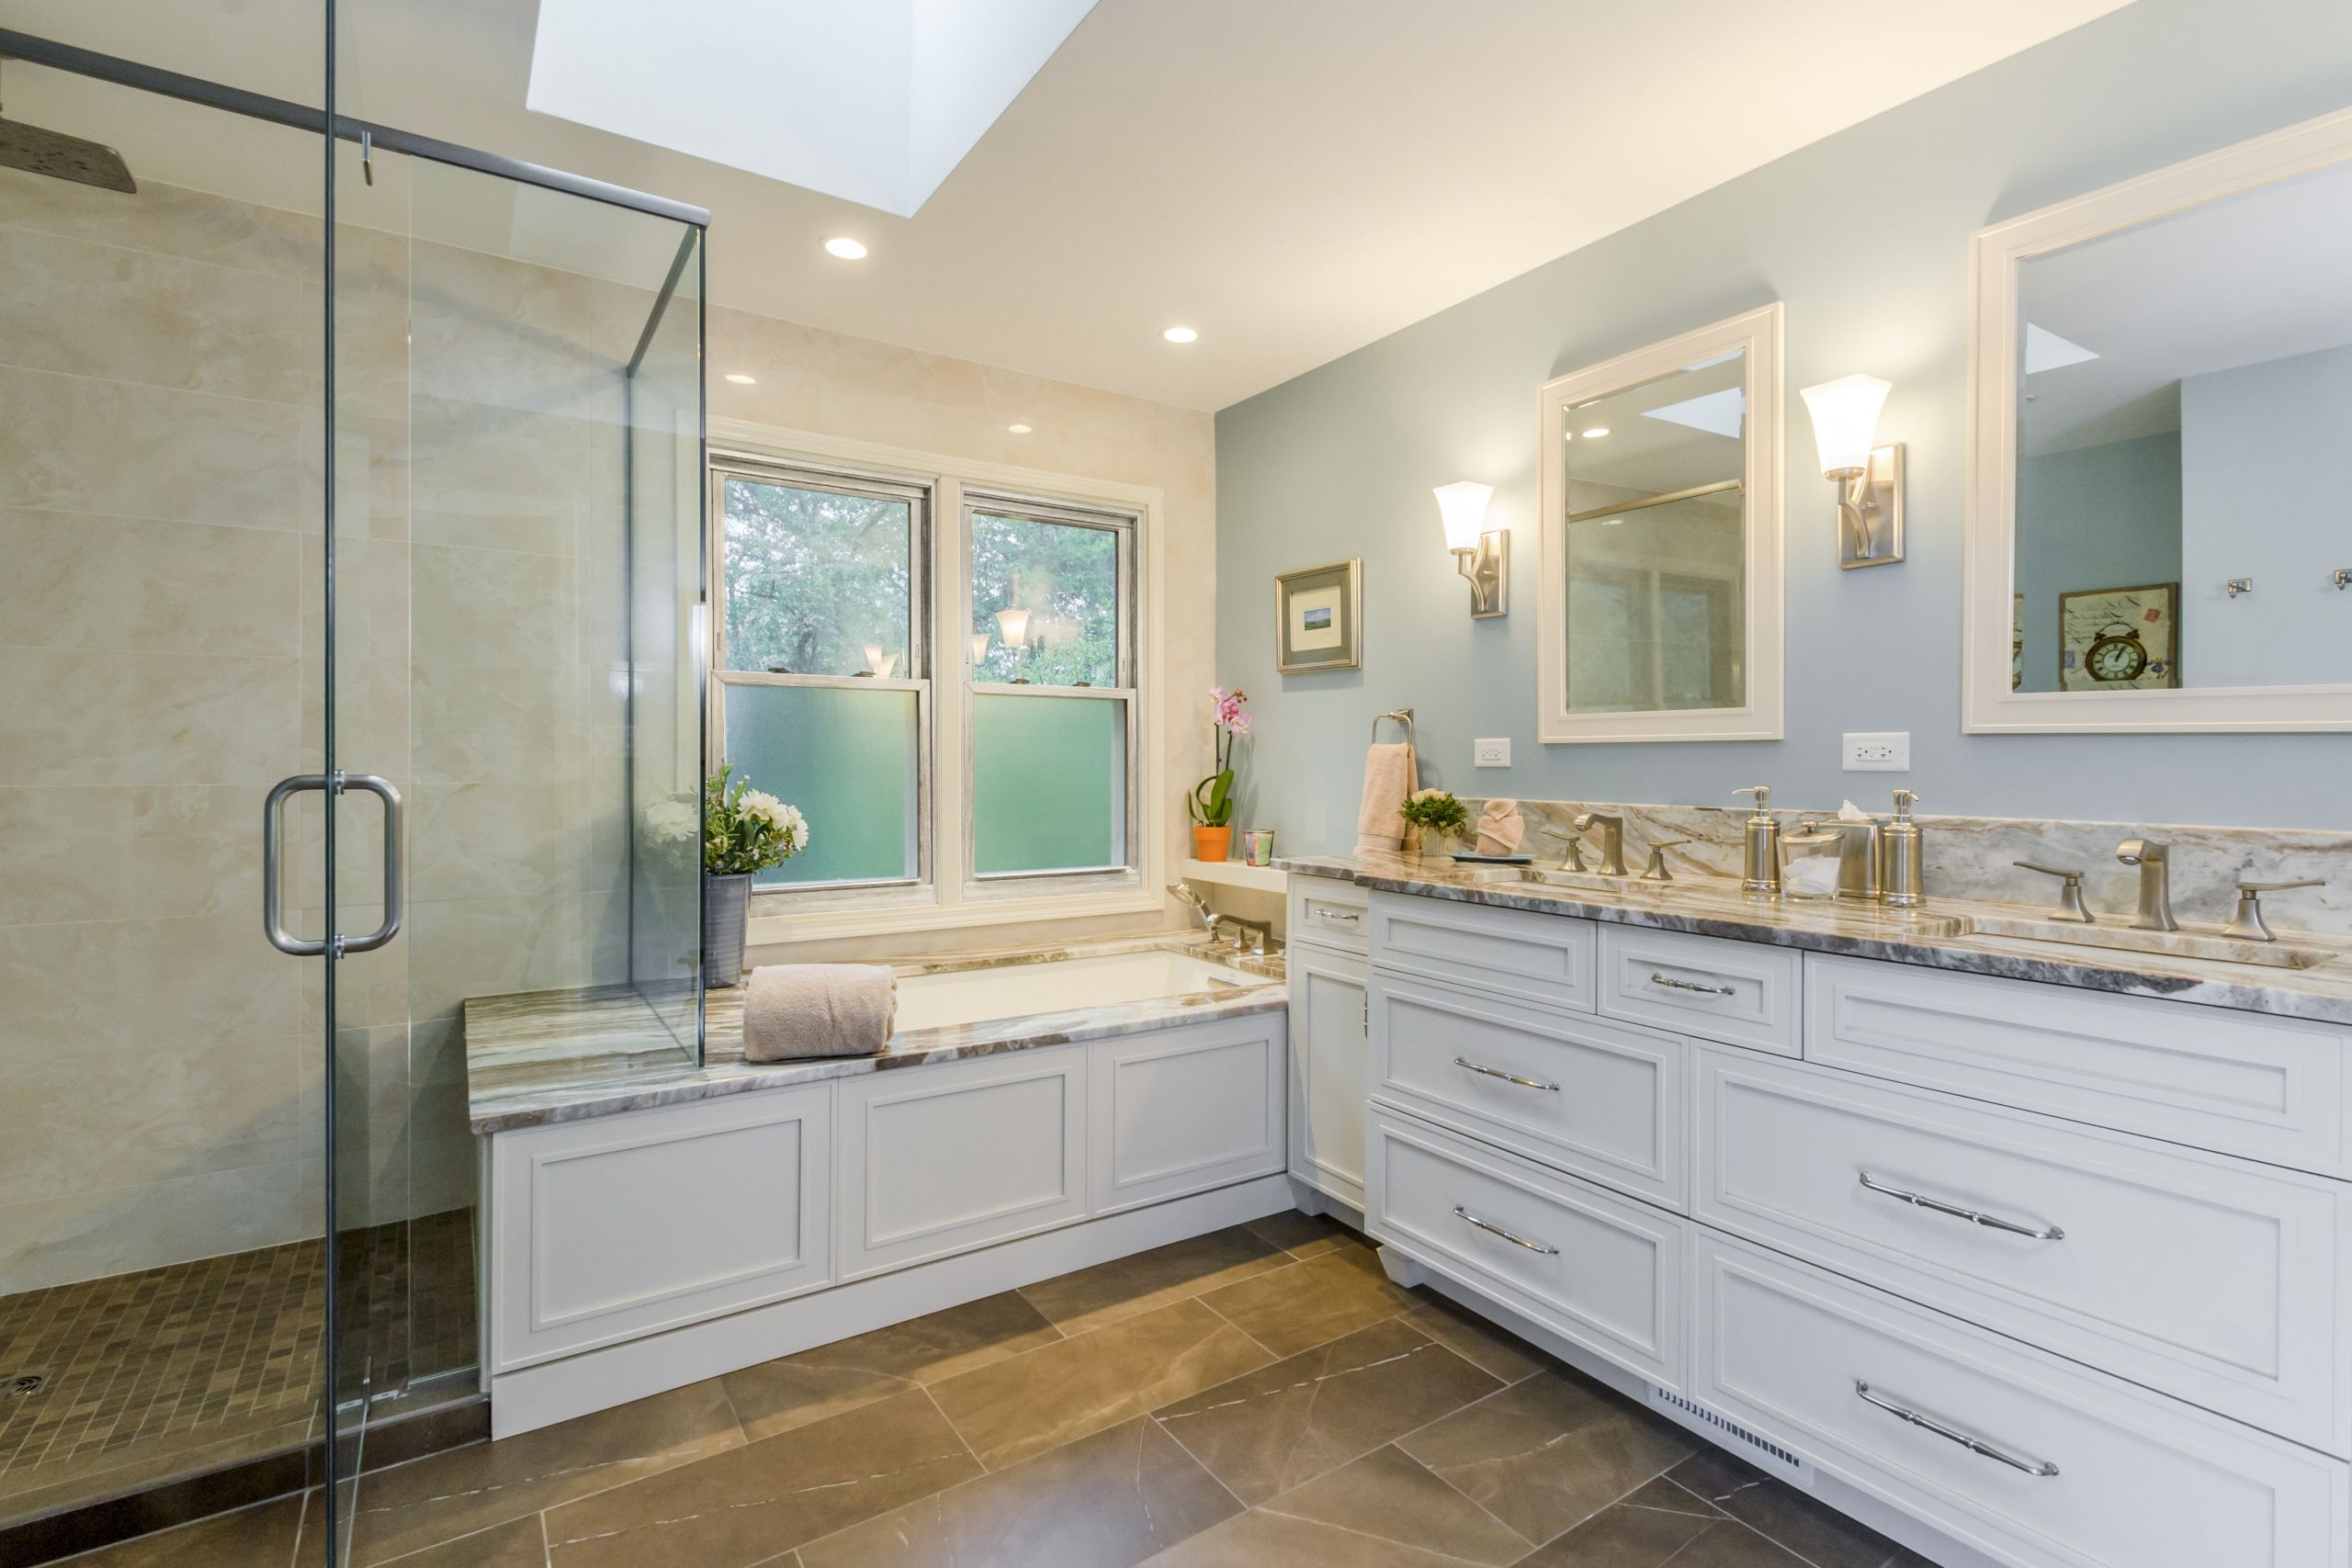 kitchen and bath remodeling naperville il